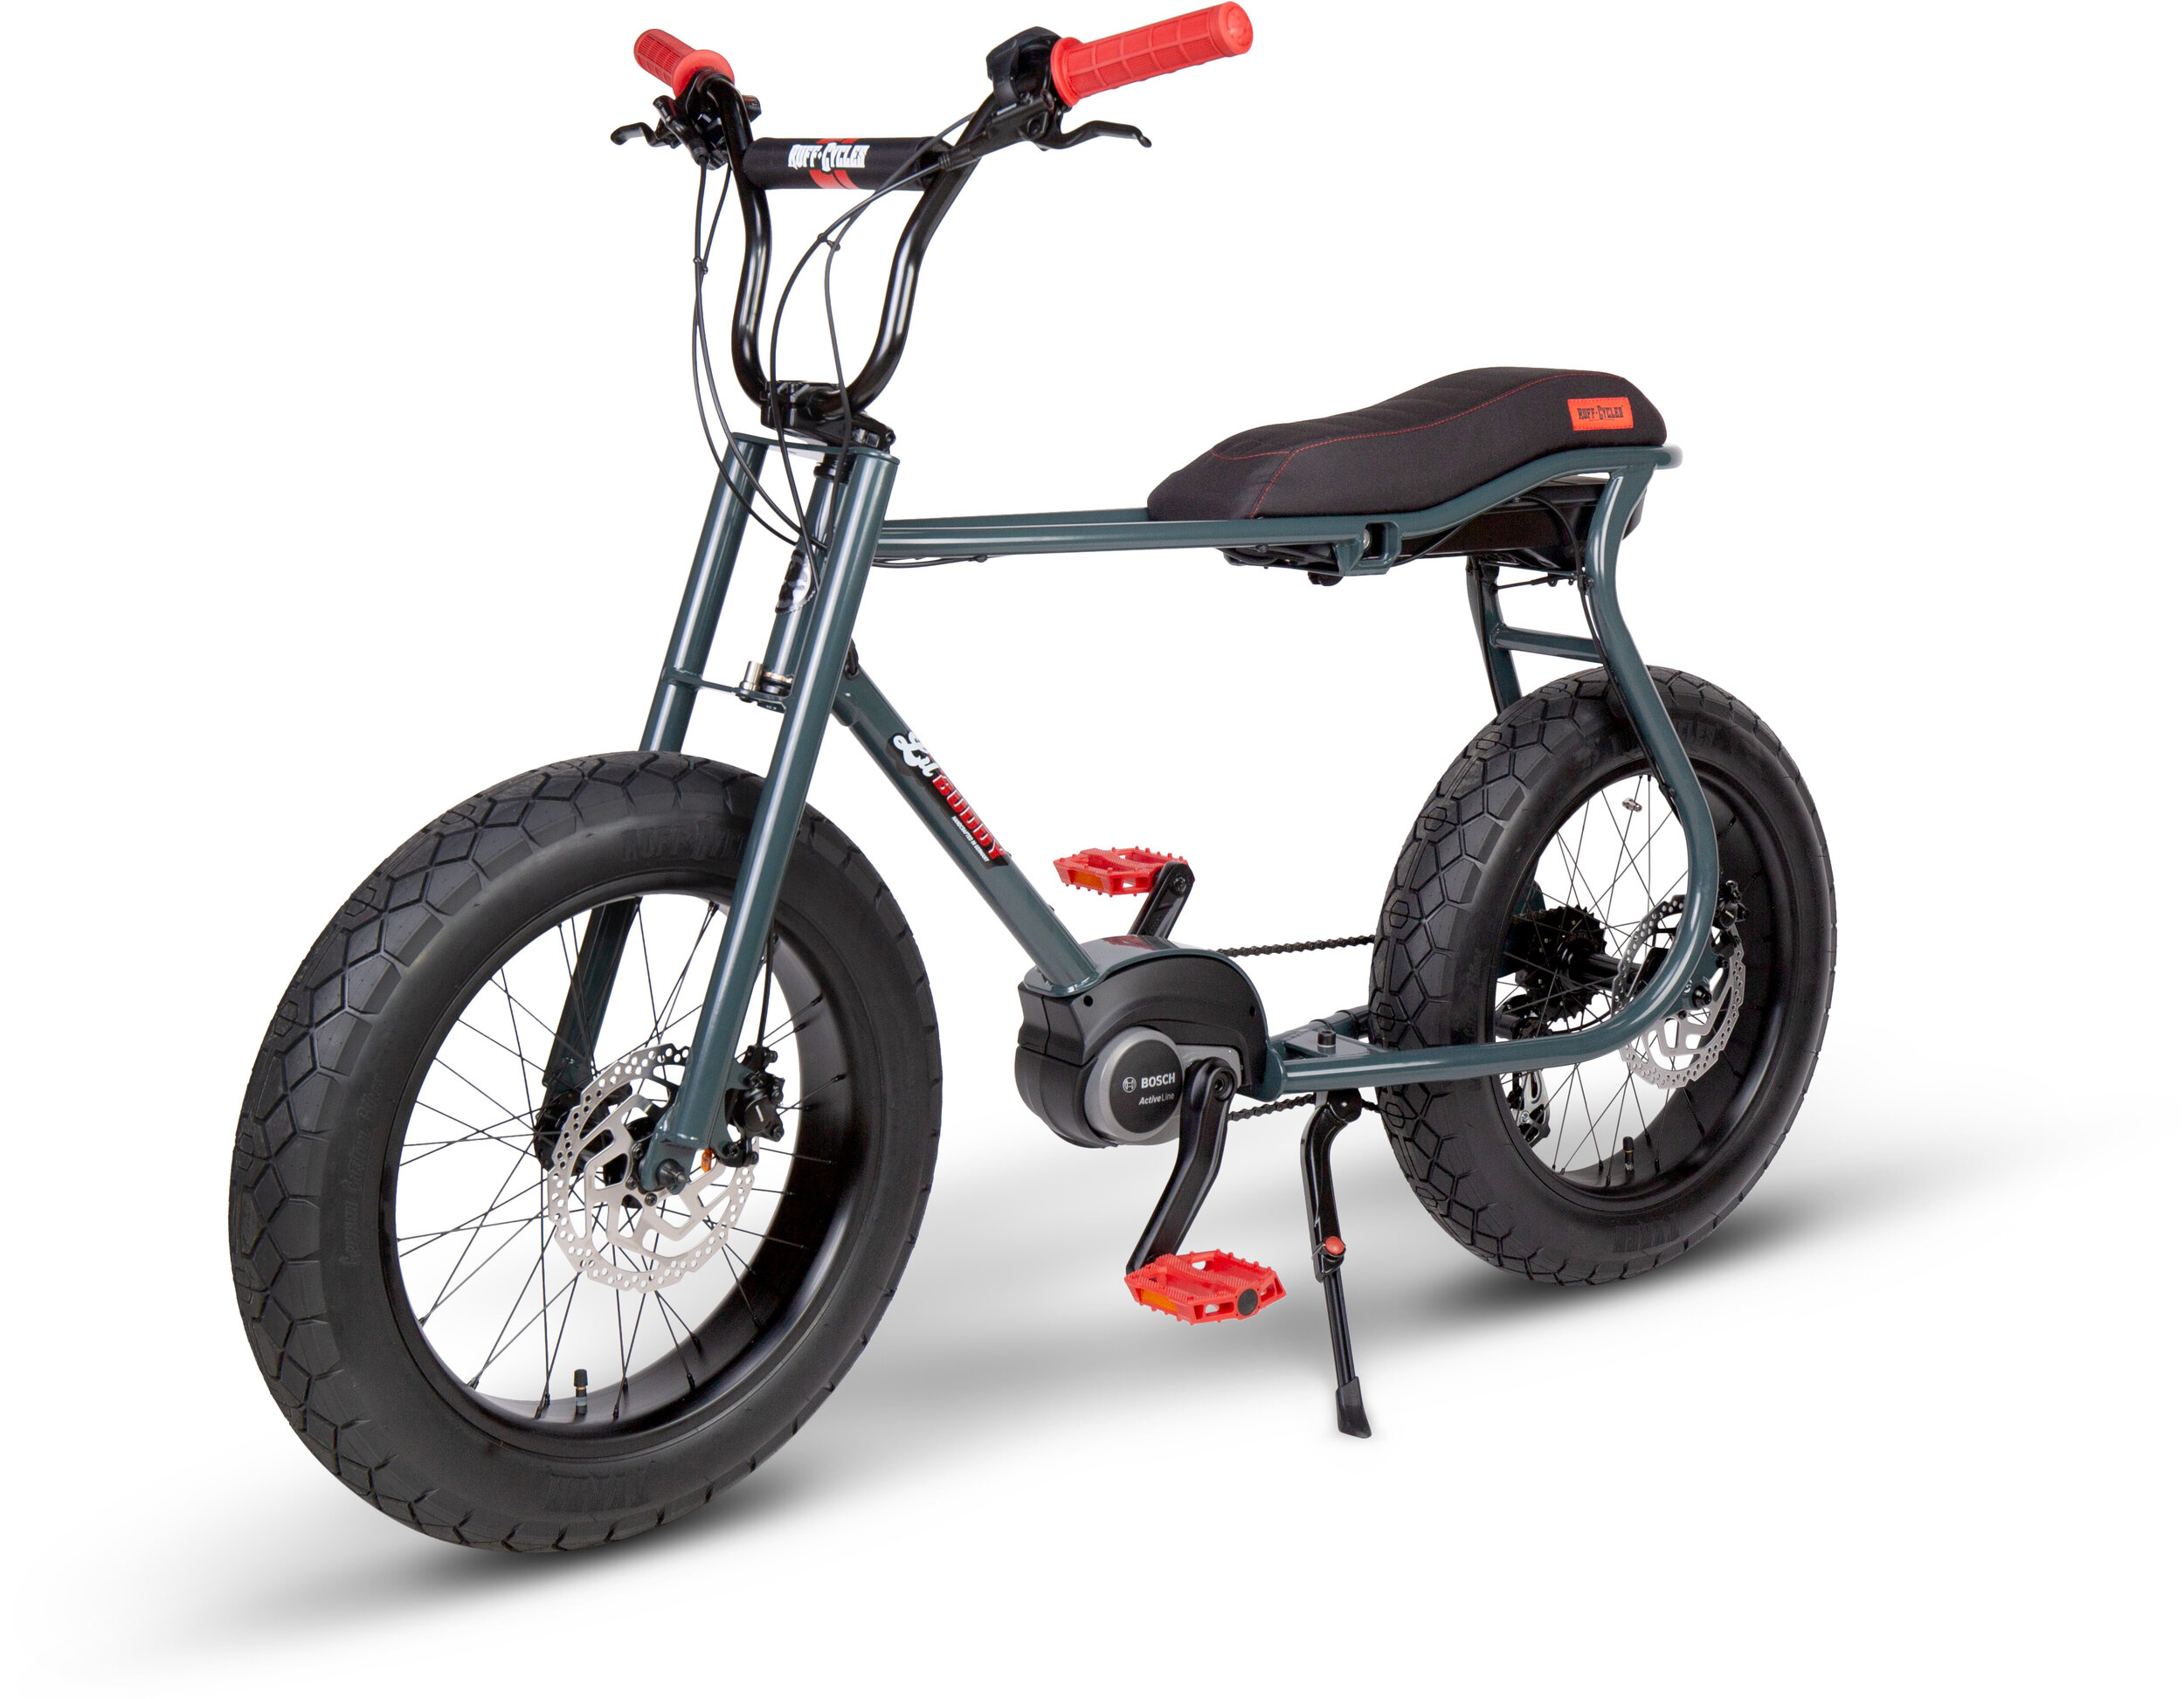 General 2 — Ruff Cycles eBikes